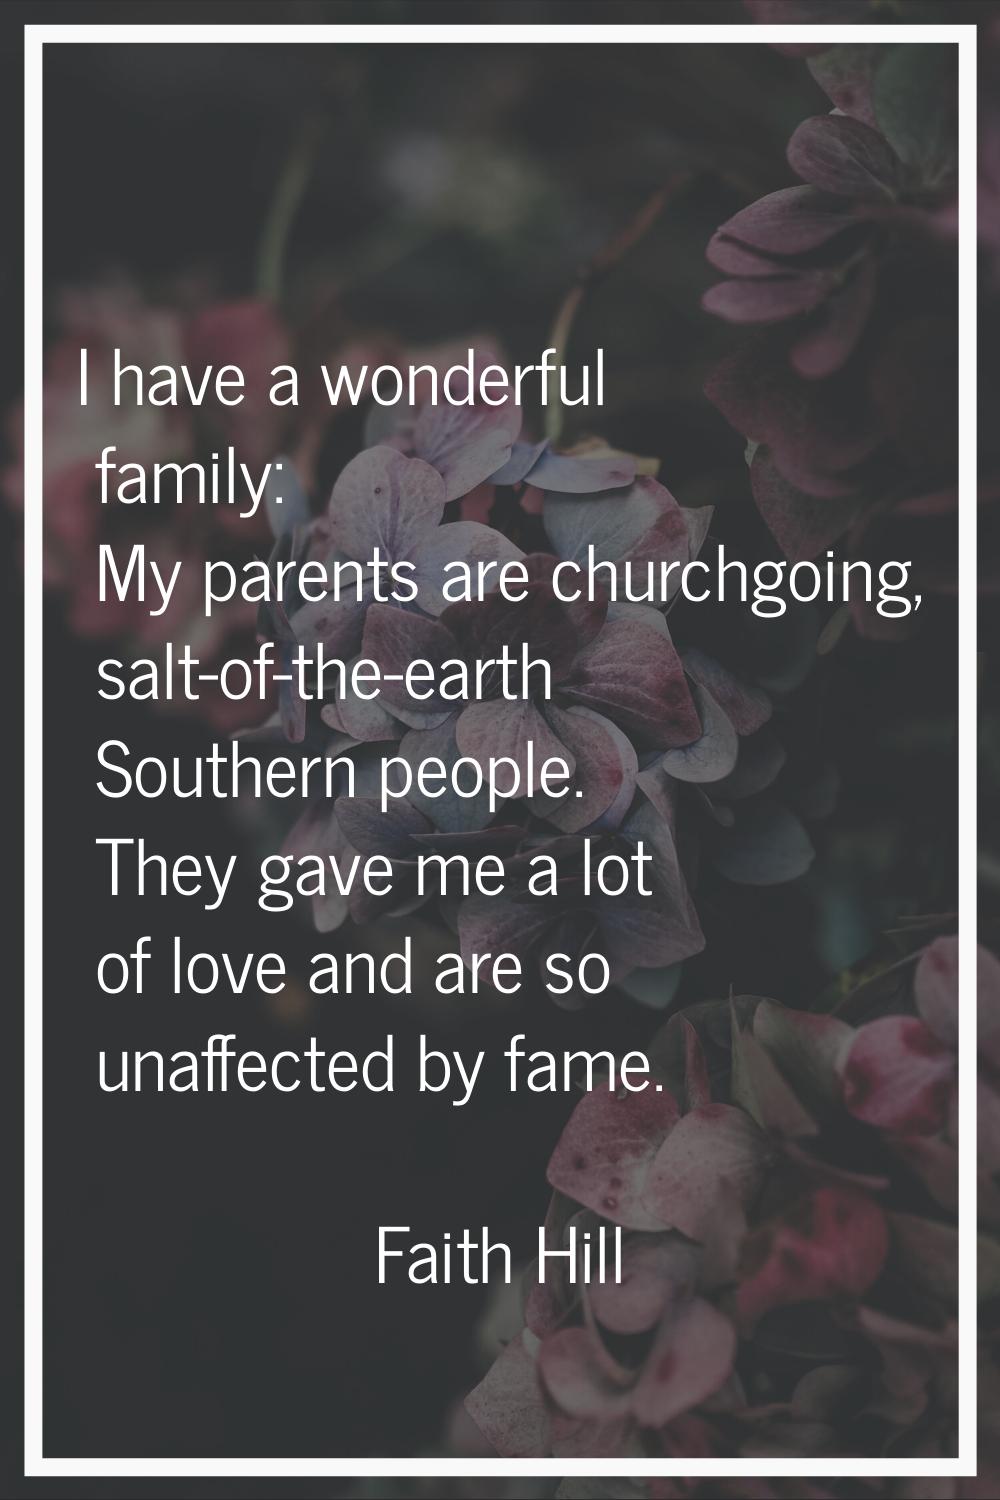 I have a wonderful family: My parents are churchgoing, salt-of-the-earth Southern people. They gave